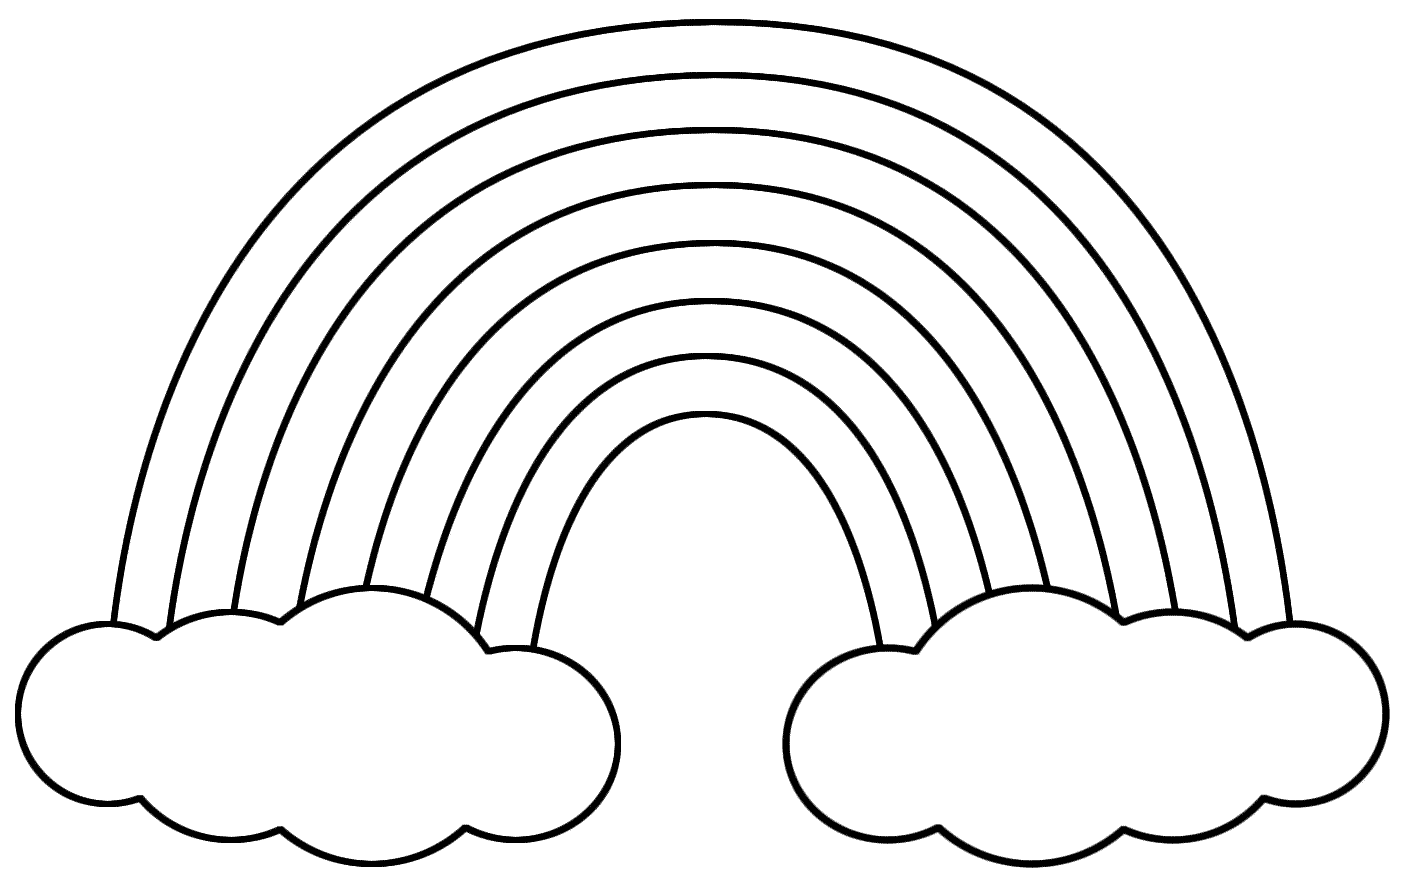 Rainbow with Clouds - Coloring Pages - ClipArt Best - ClipArt Best